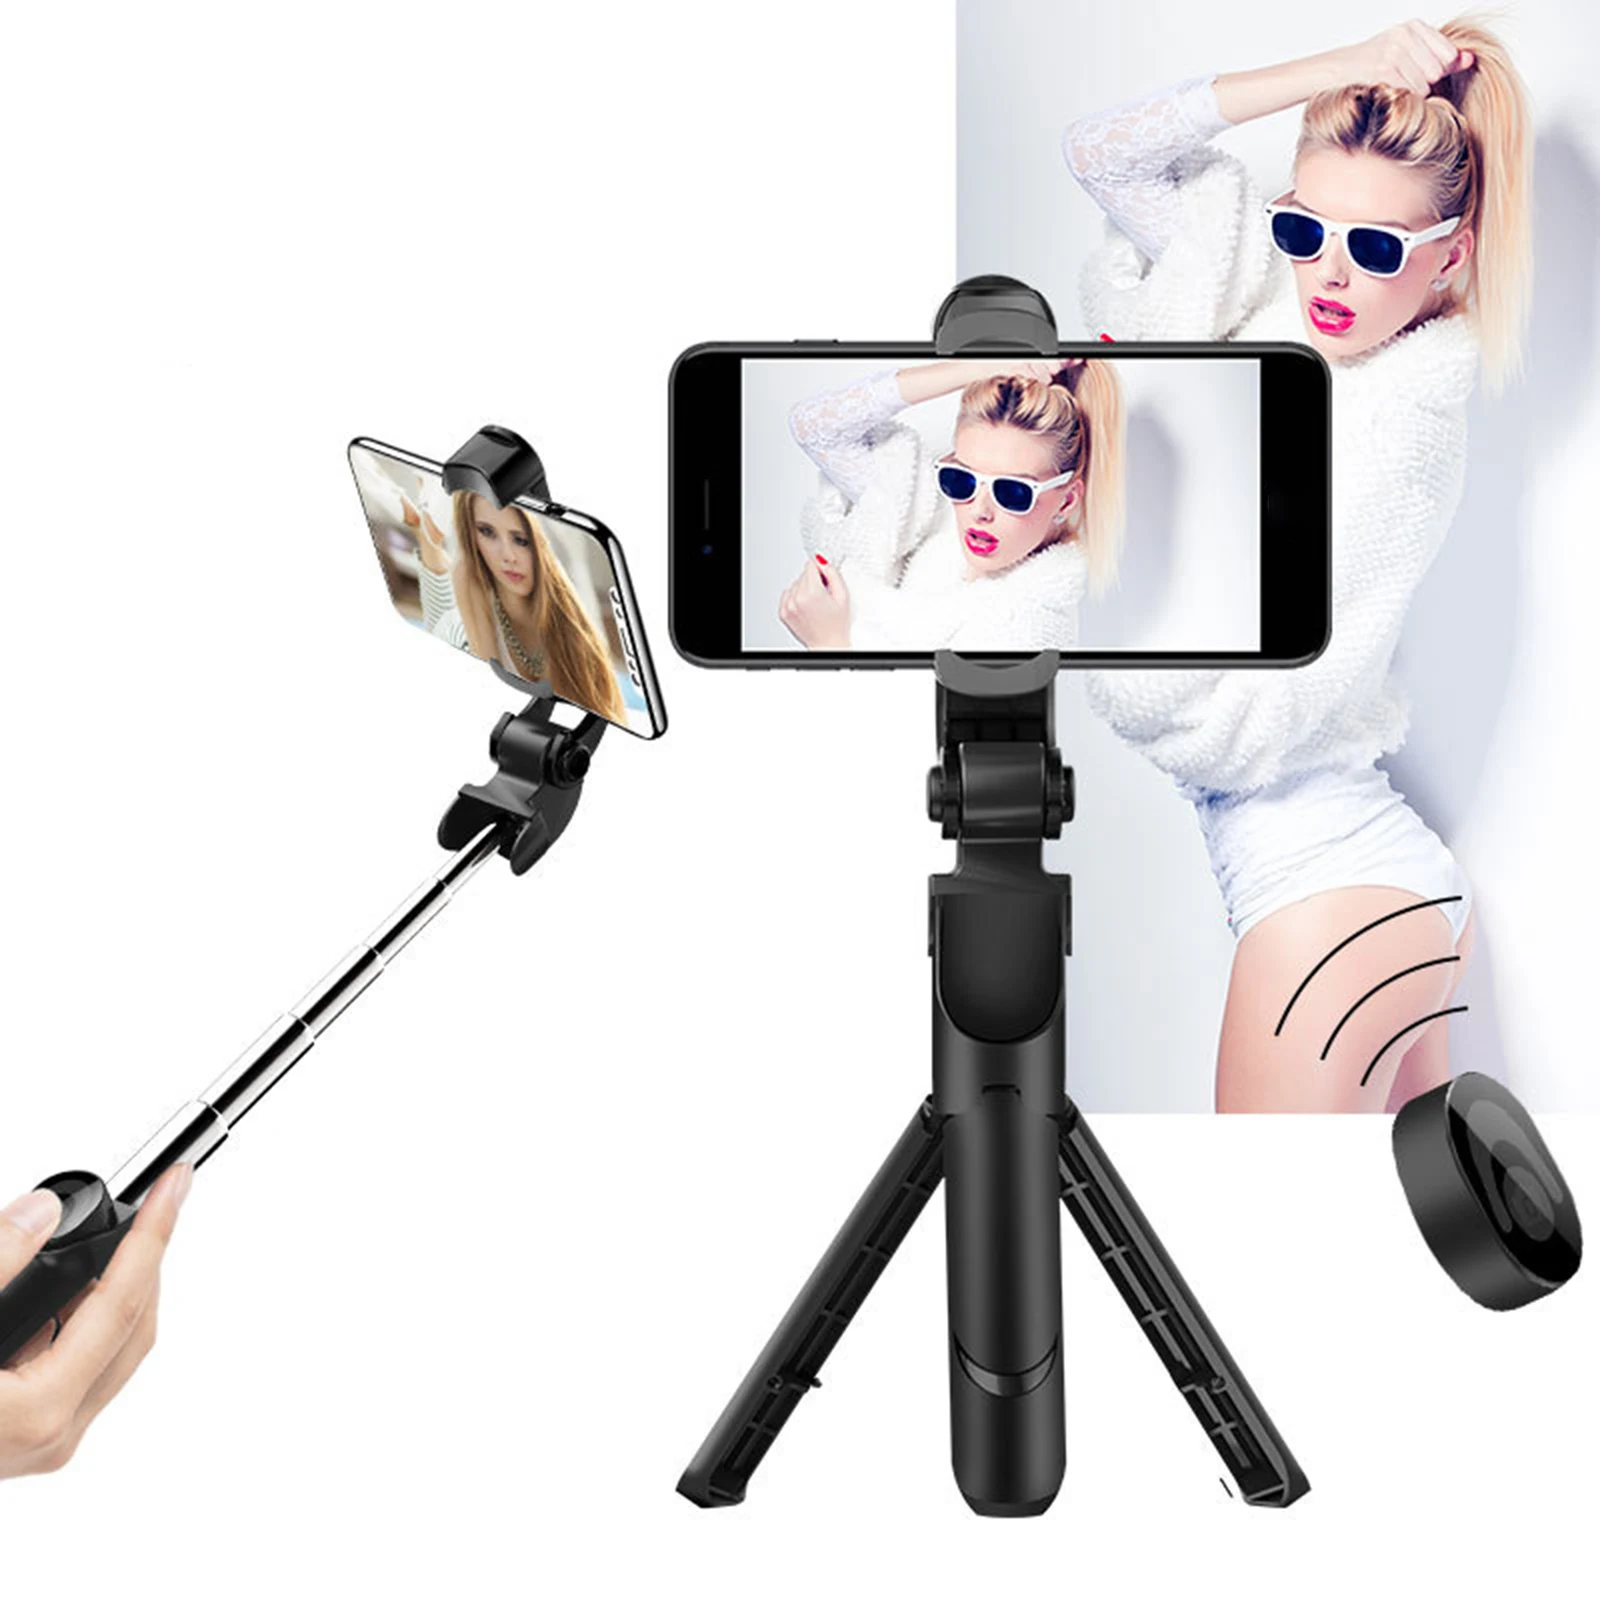 XT09 Compact Extendable Selfie Stick Tripod Phone Holder with Bluetooth Remote for Recording Videos